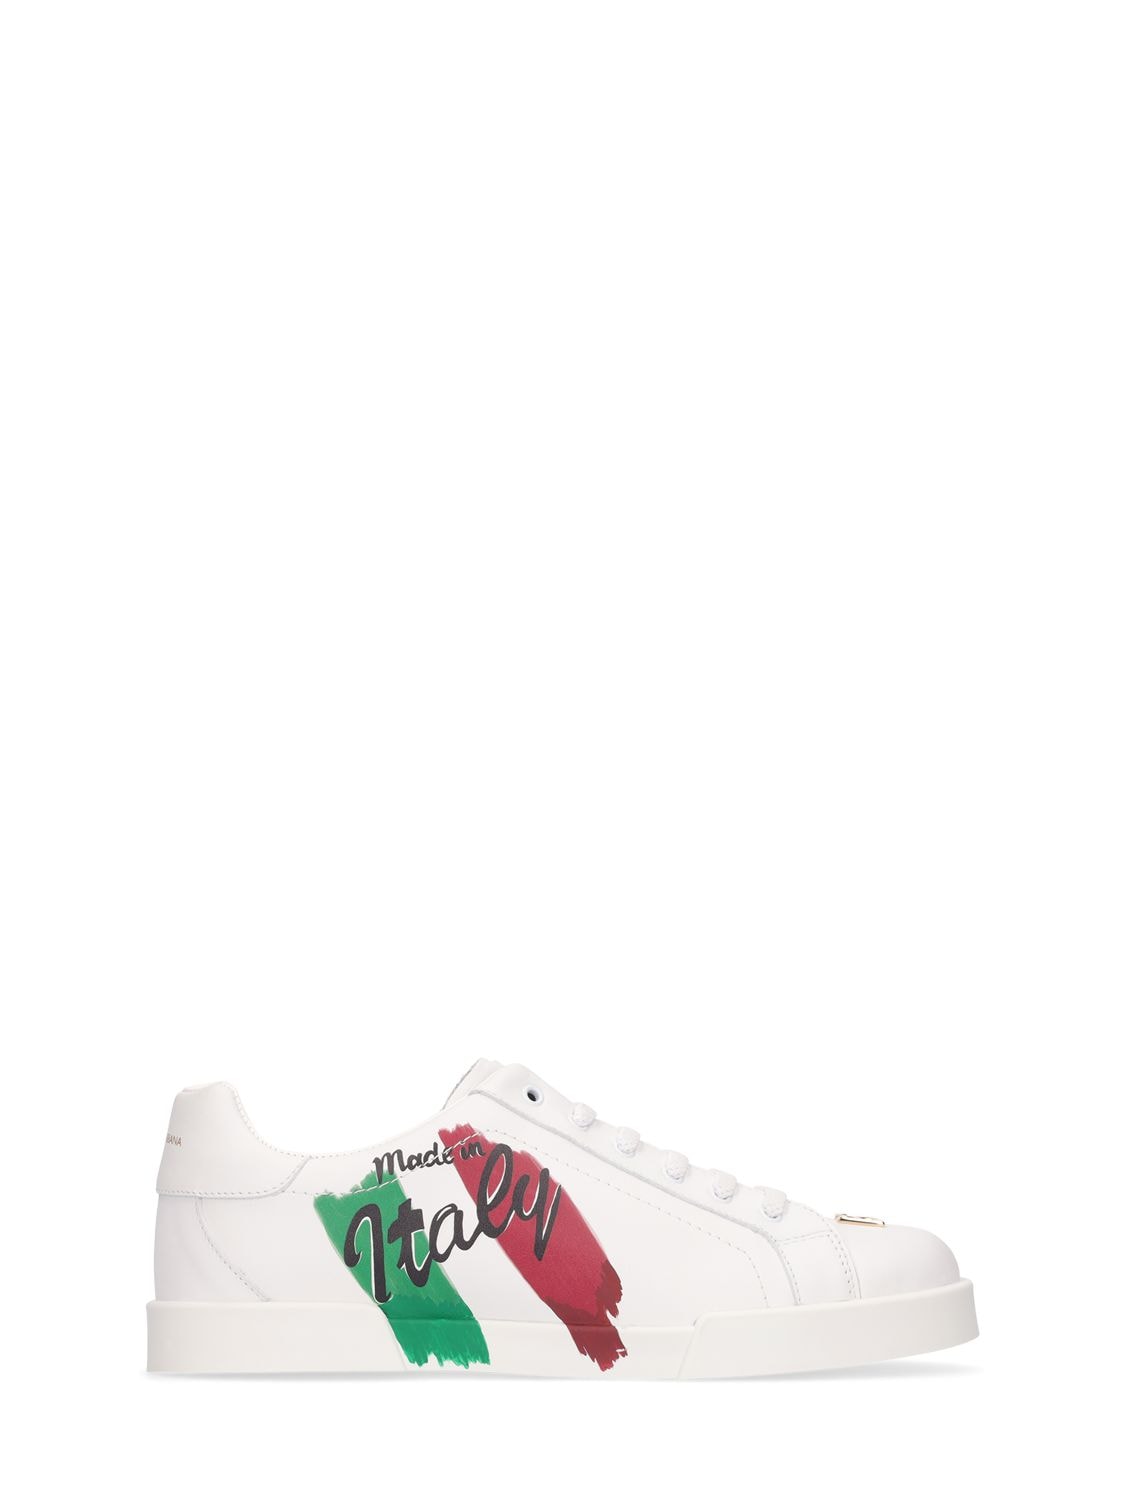 Leather Lace-up Sneakers W/ Italian Flag